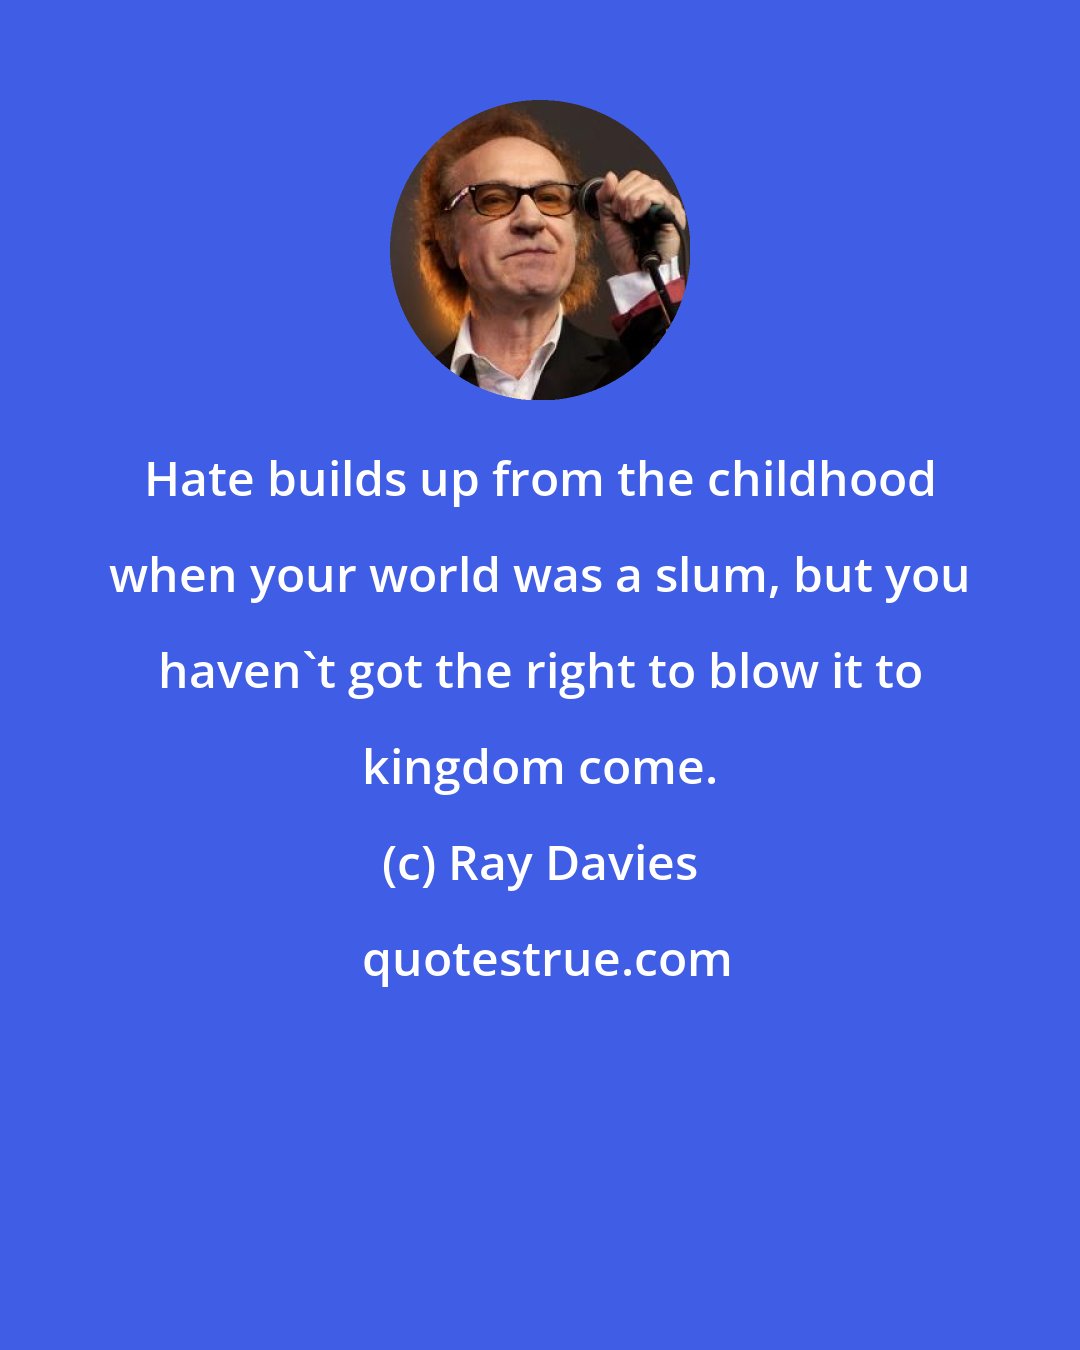 Ray Davies: Hate builds up from the childhood when your world was a slum, but you haven't got the right to blow it to kingdom come.